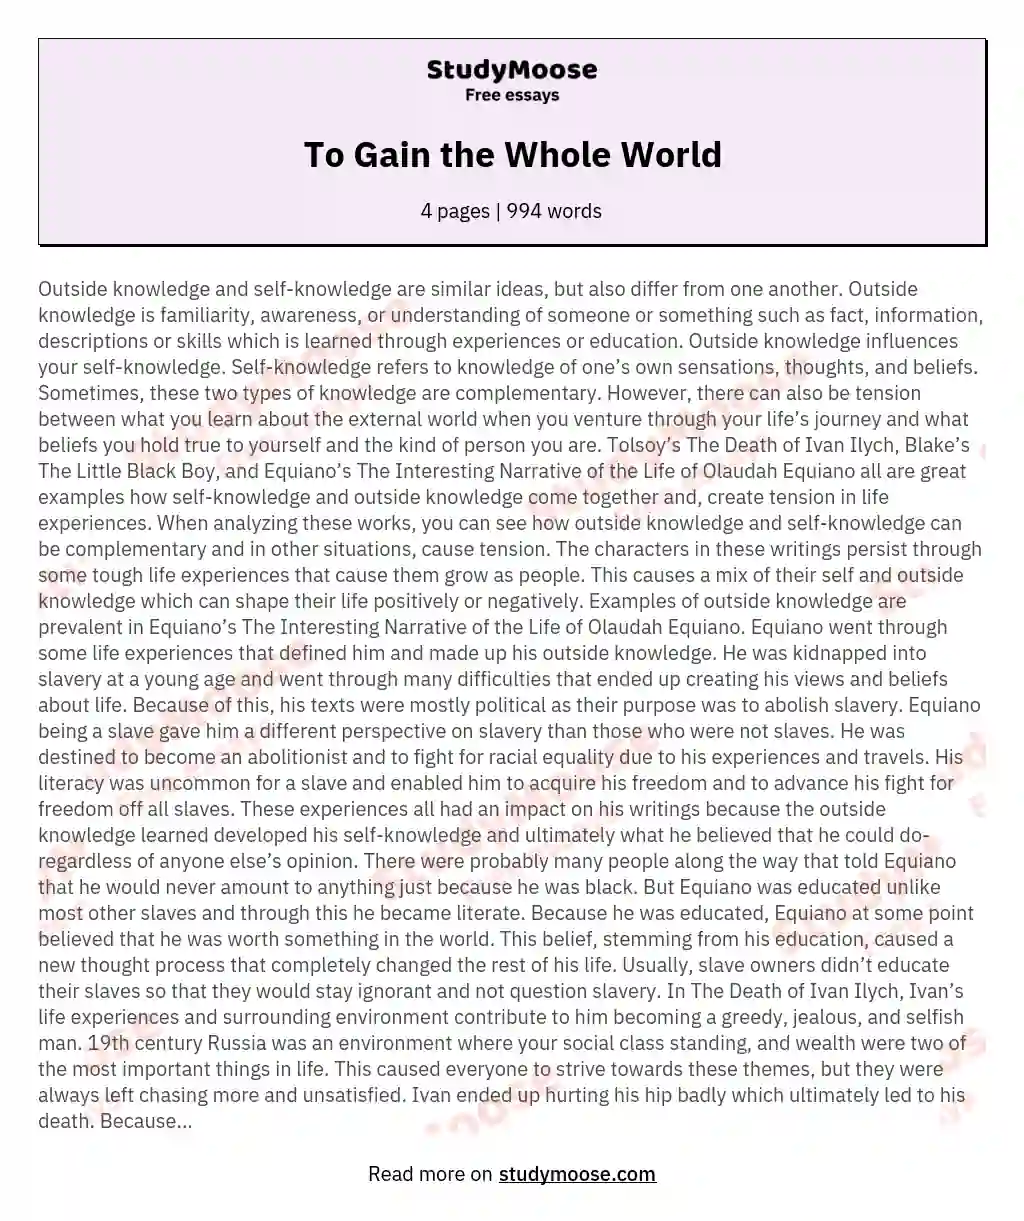 To Gain the Whole World essay